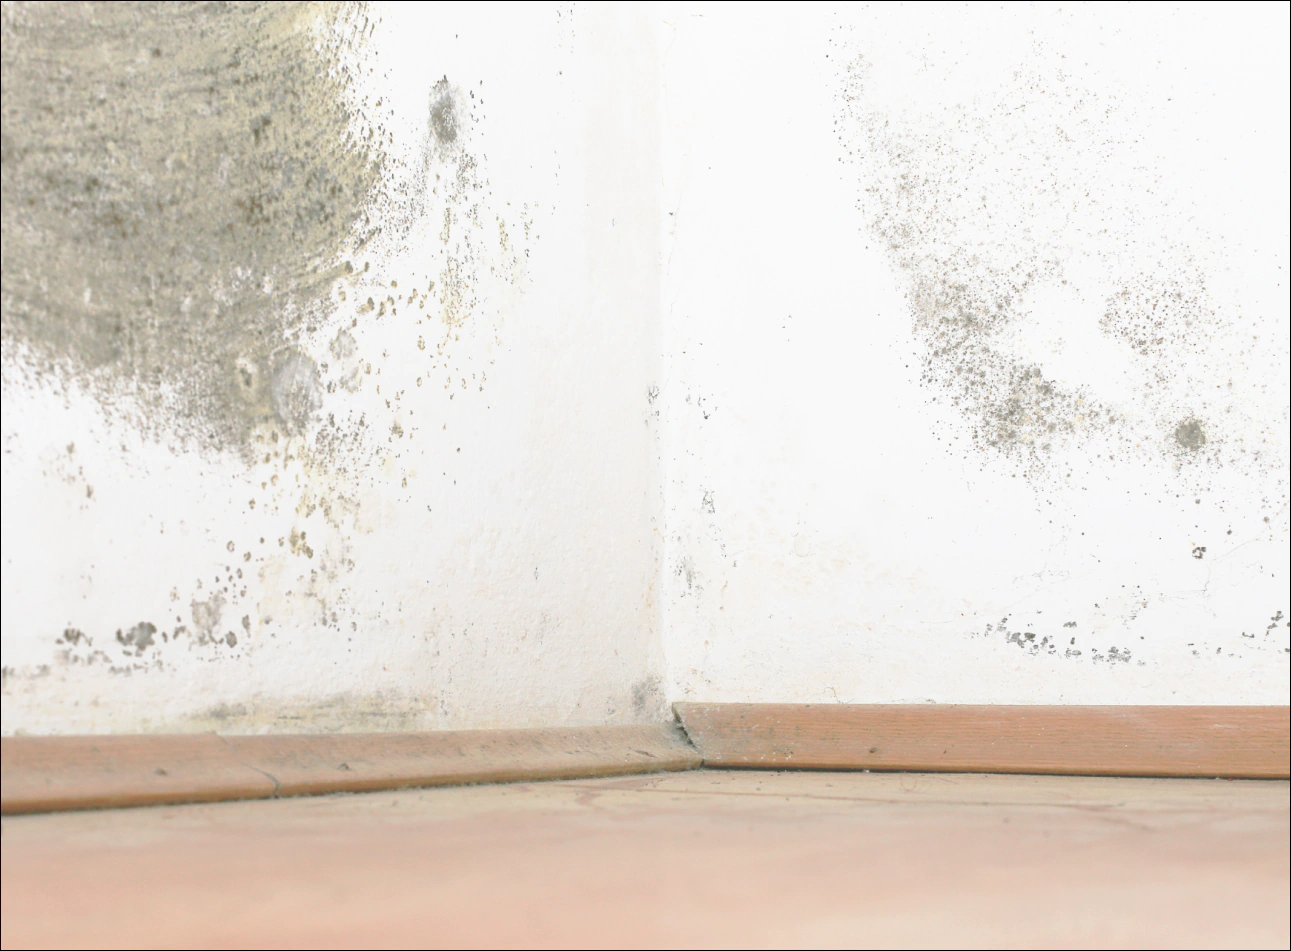 walls covered in mold